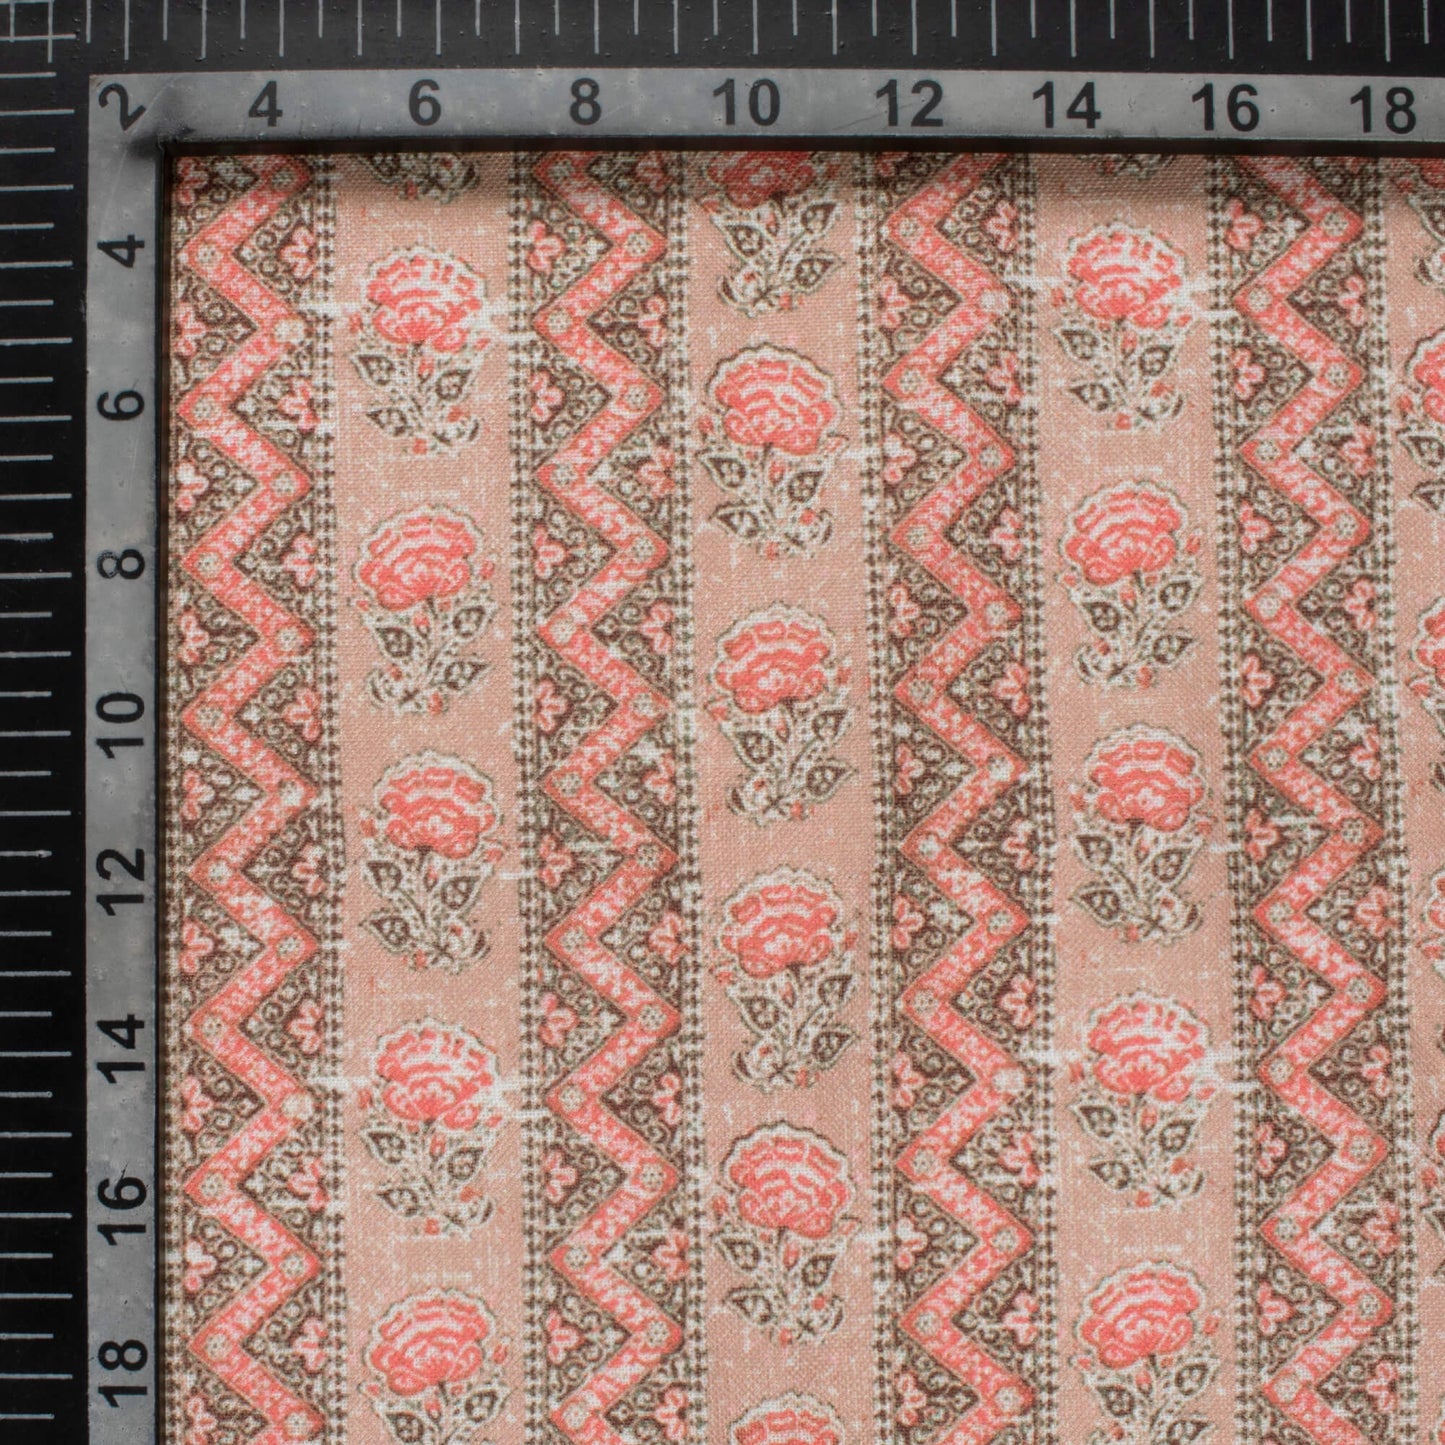 Peach And Desire Red Floral Pattern Digital Print Linen Textured Fabric (Width 56 Inches)